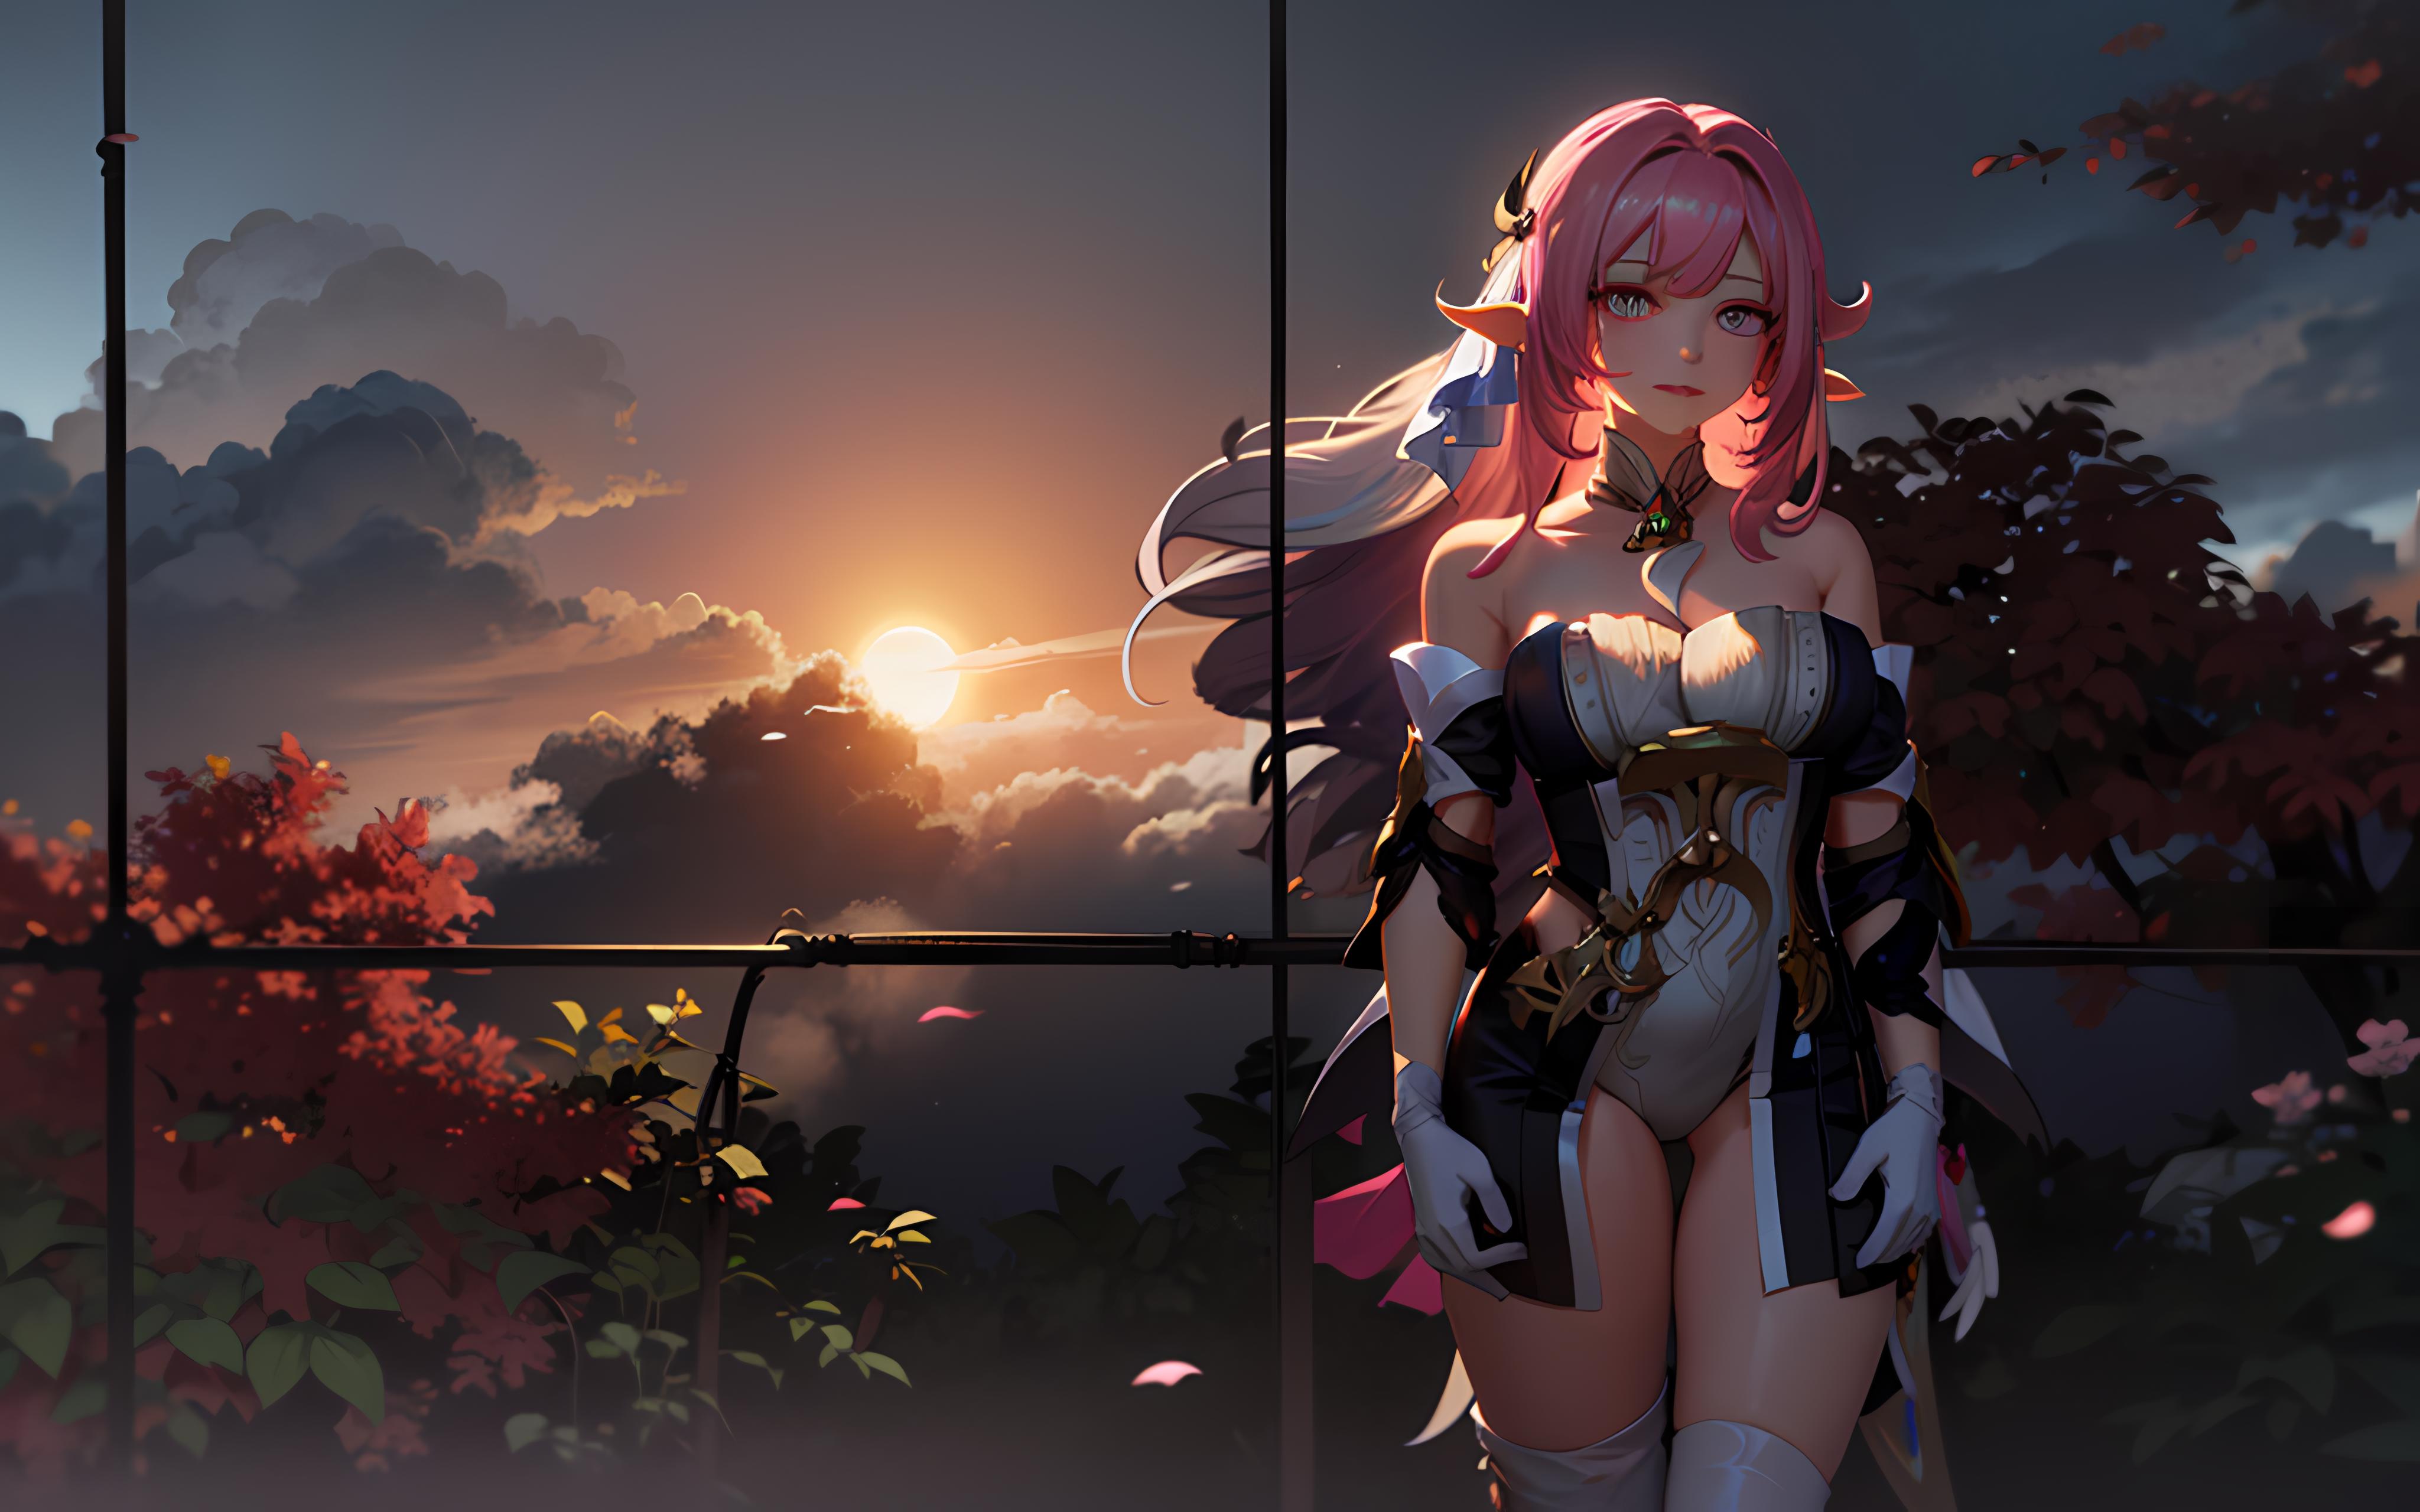 Elysia HoH without bells | Honkai Impact 3rd image by Daeart